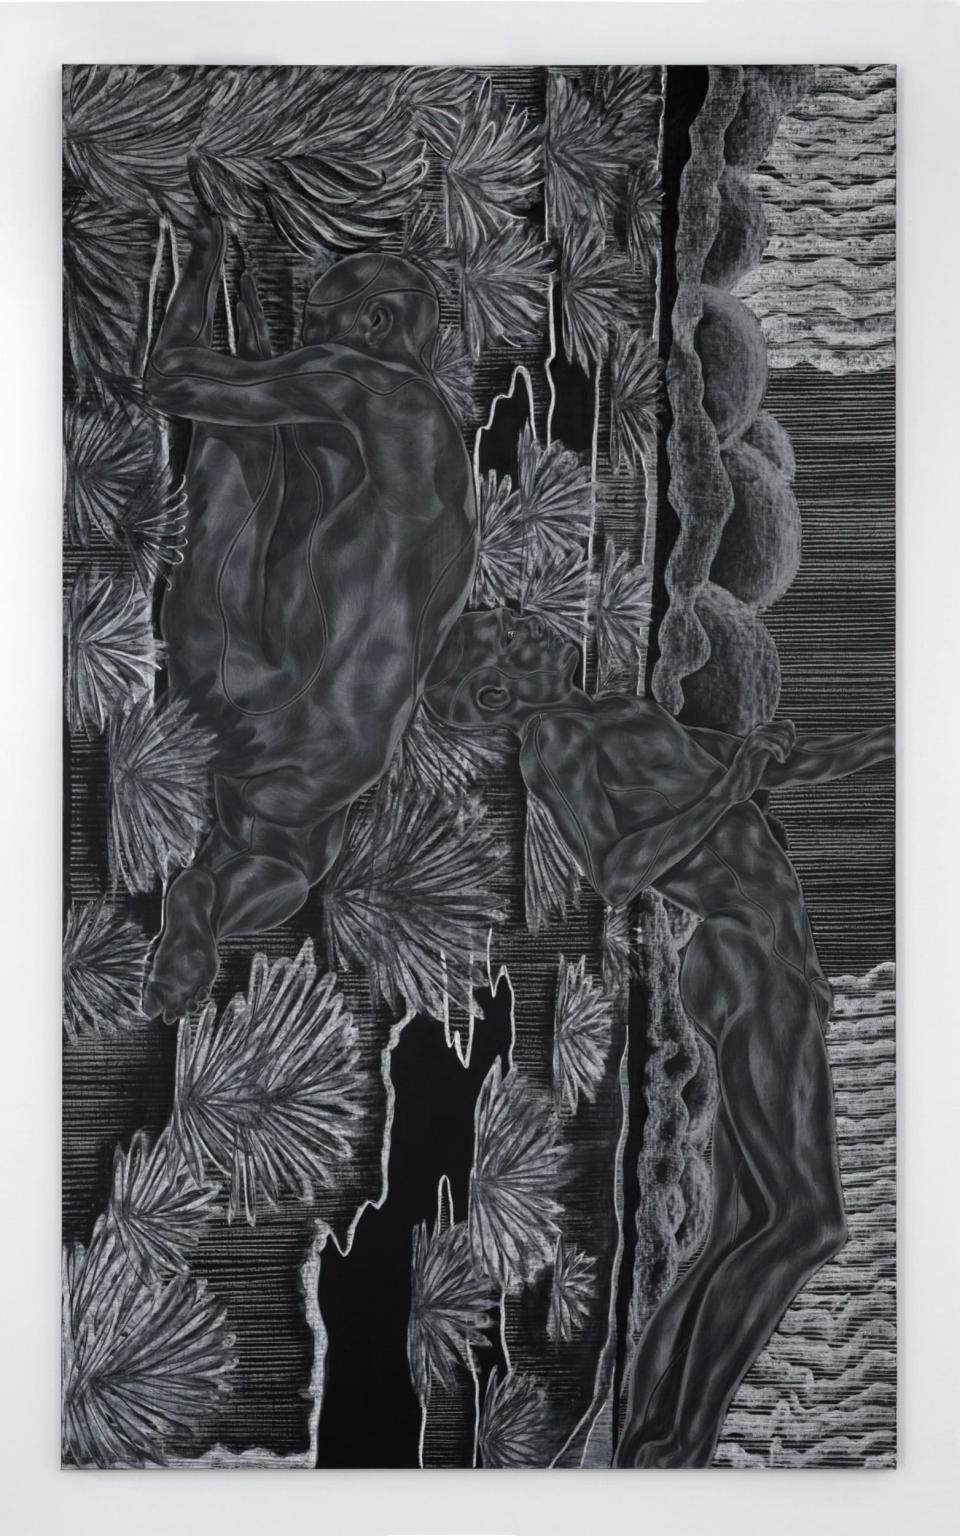 An artwork from Toyin Ojih Odutola's A Countervailing Theory - Jack Shainman Gallery, New York